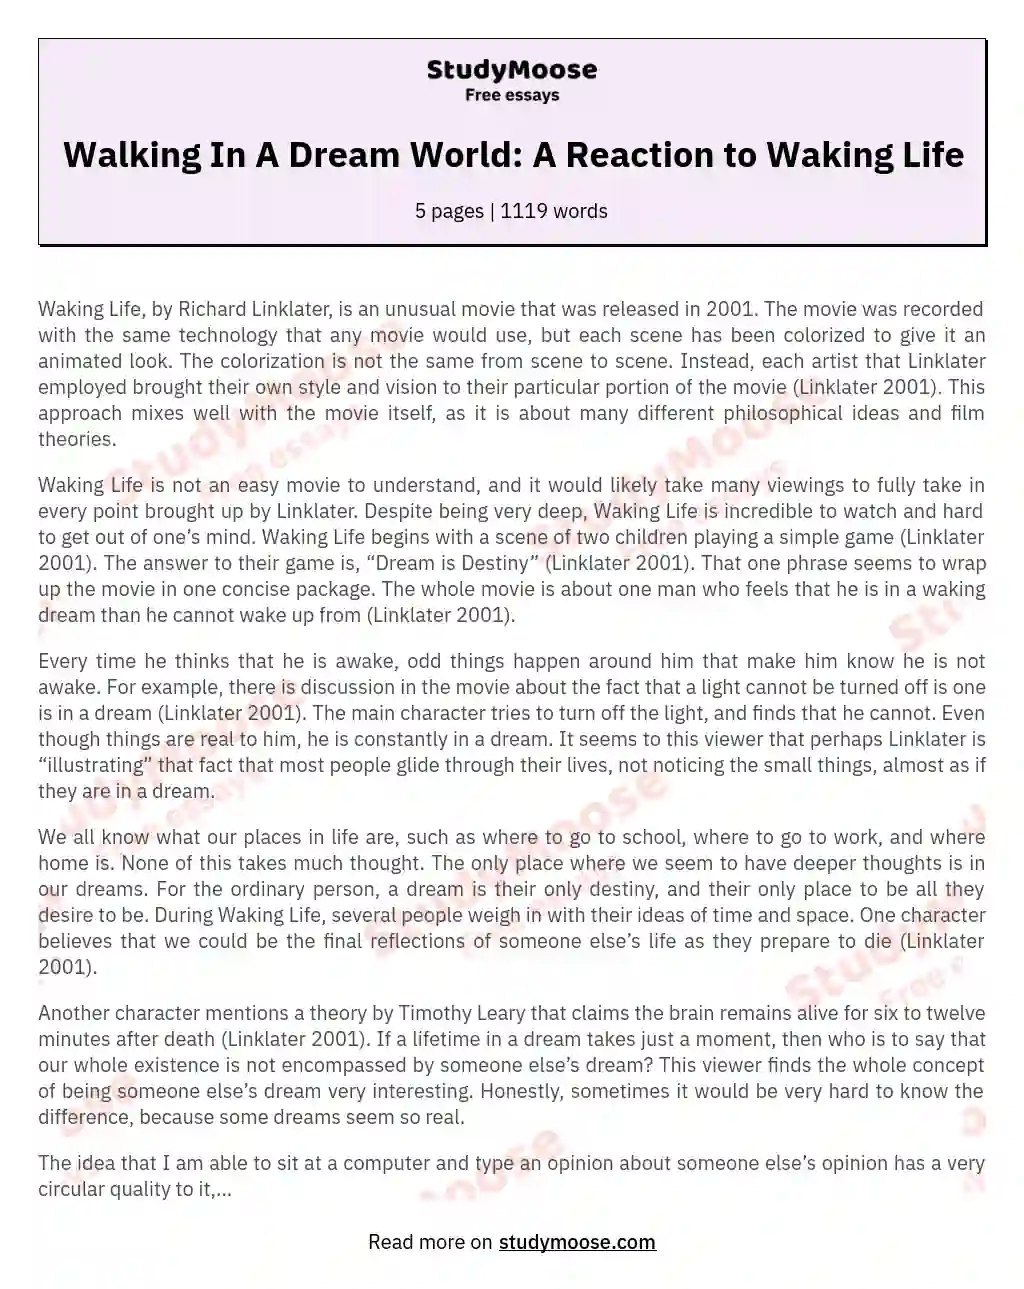 Walking In A Dream World: A Reaction to Waking Life essay